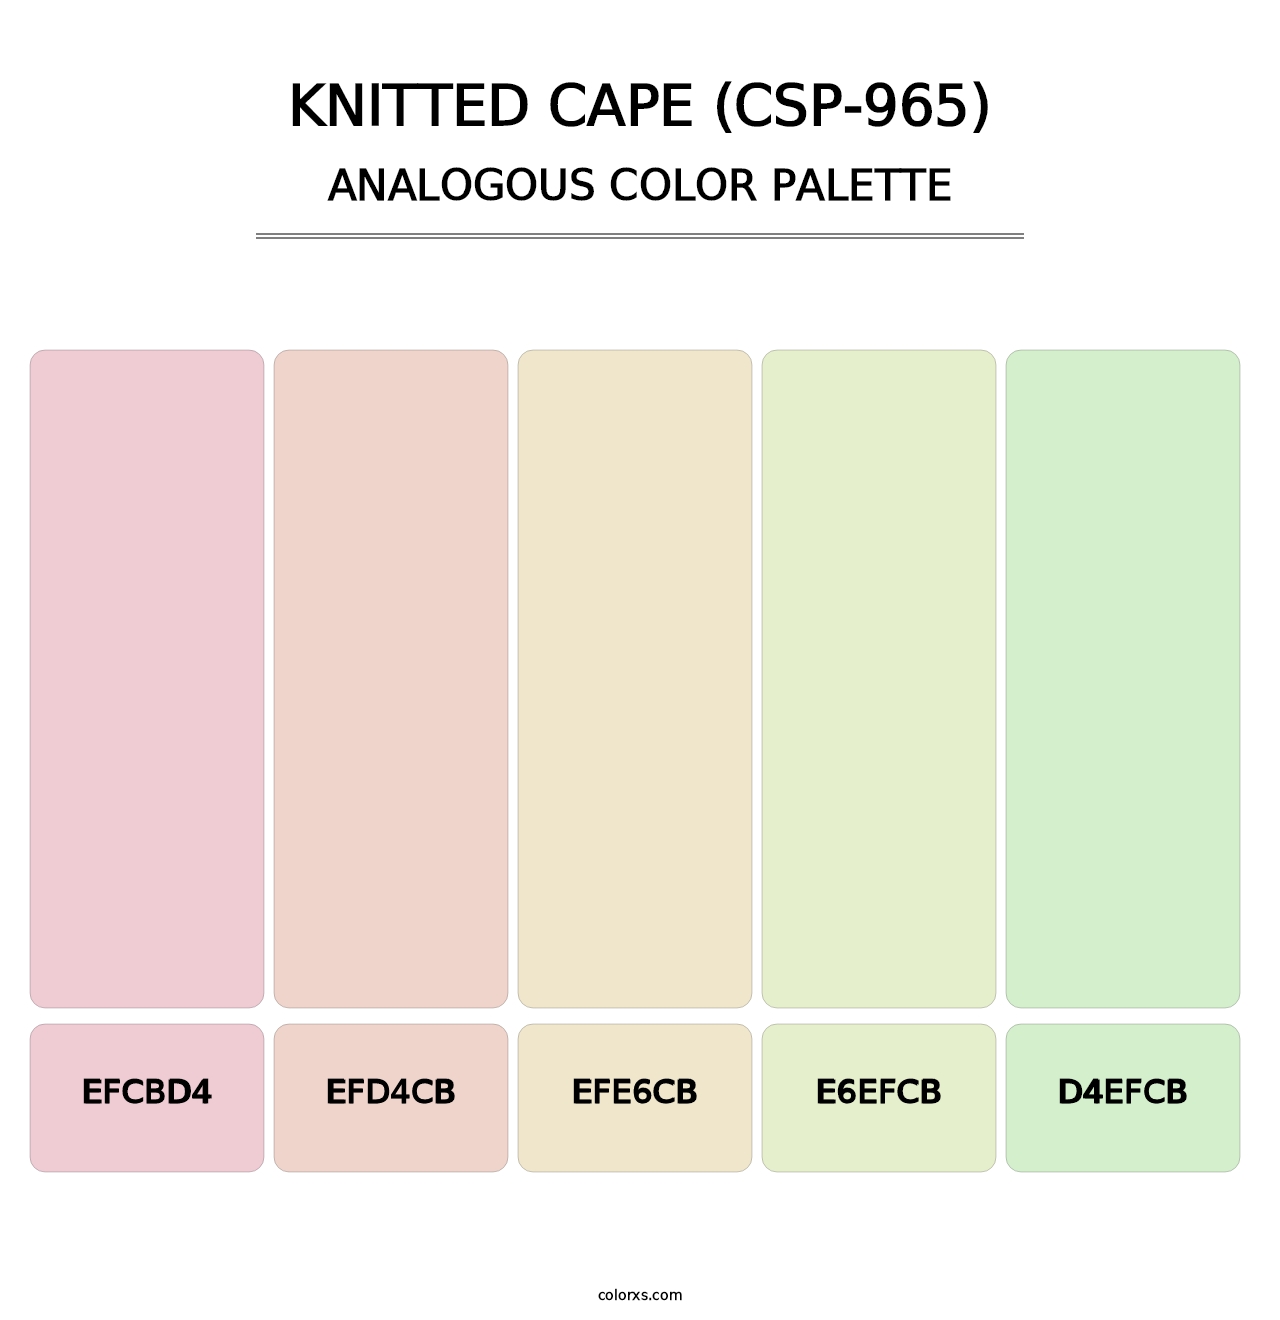 Knitted Cape (CSP-965) - Analogous Color Palette